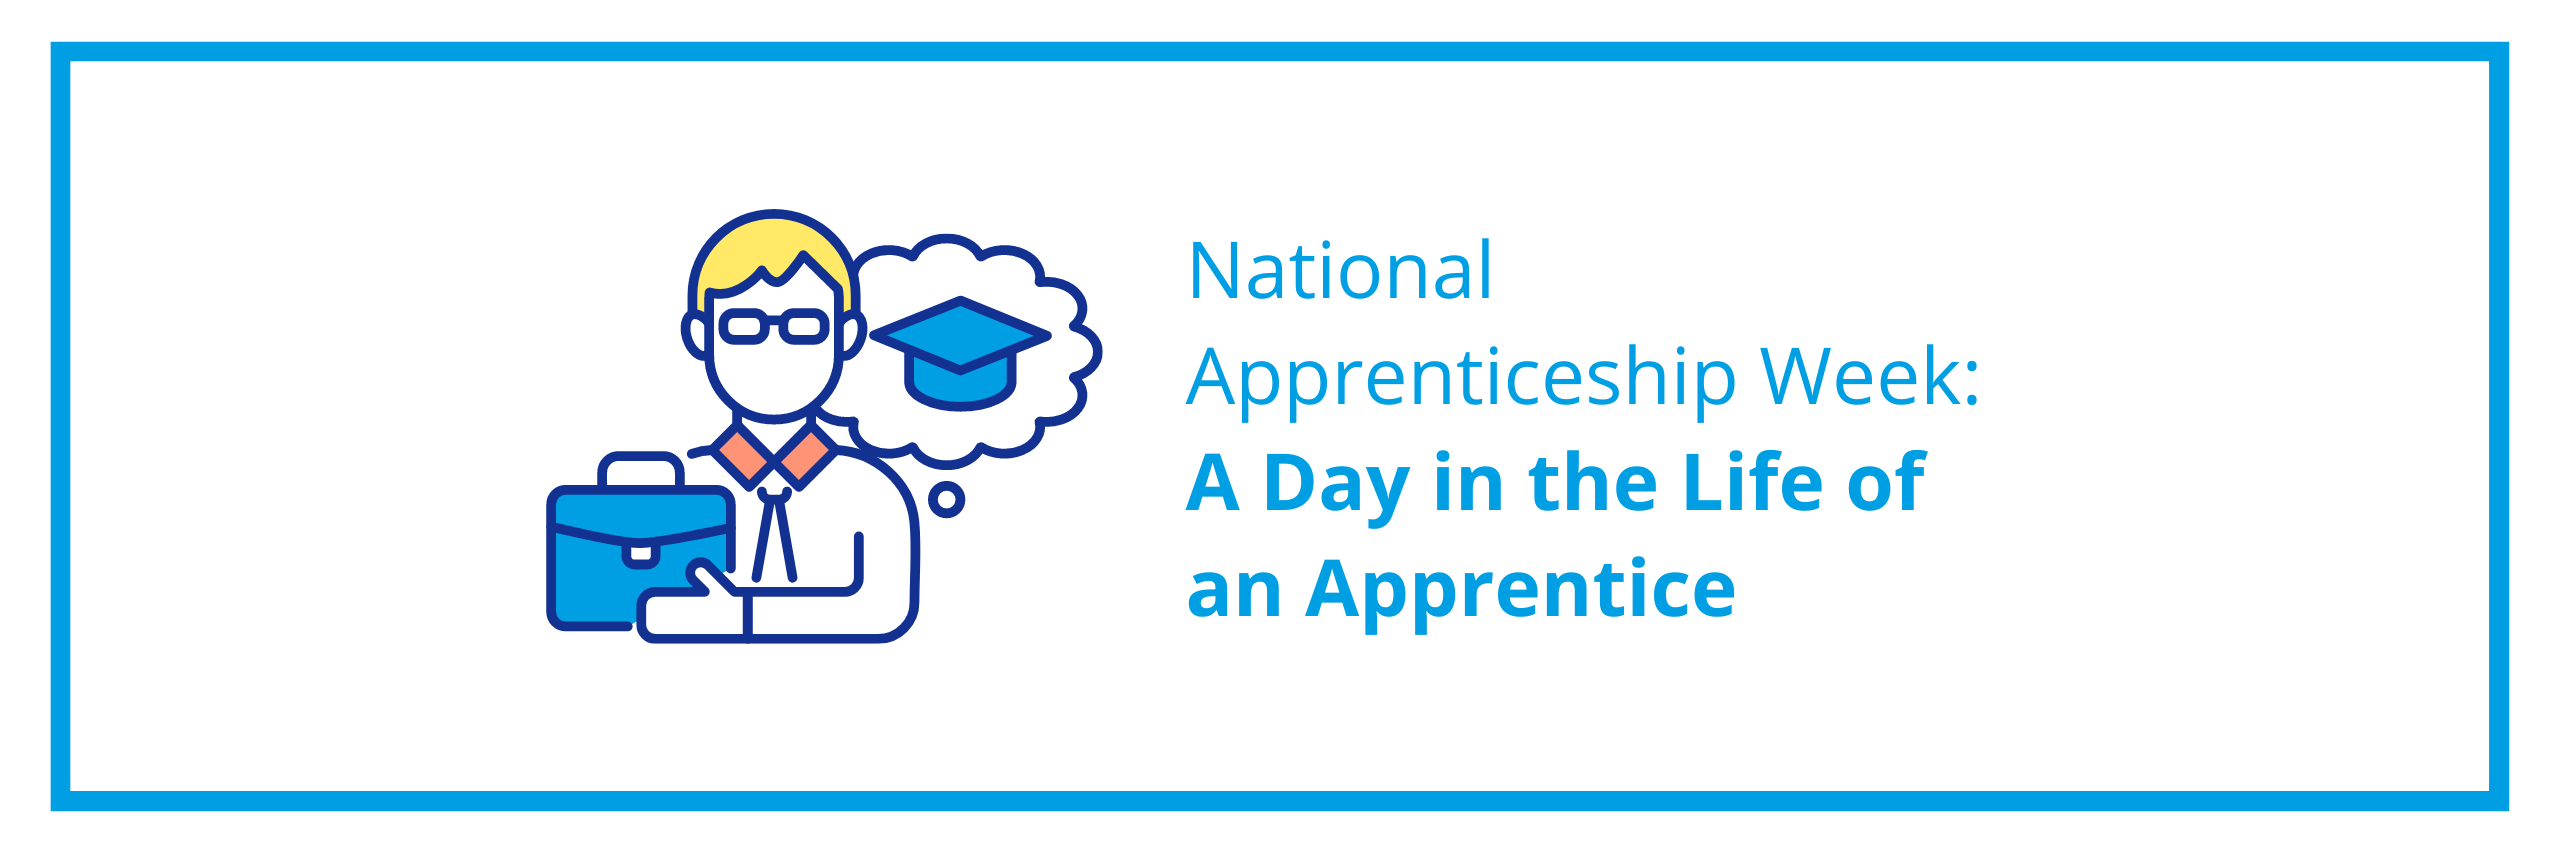 National Apprenticeship Week: A Day in the Life of an Apprentice